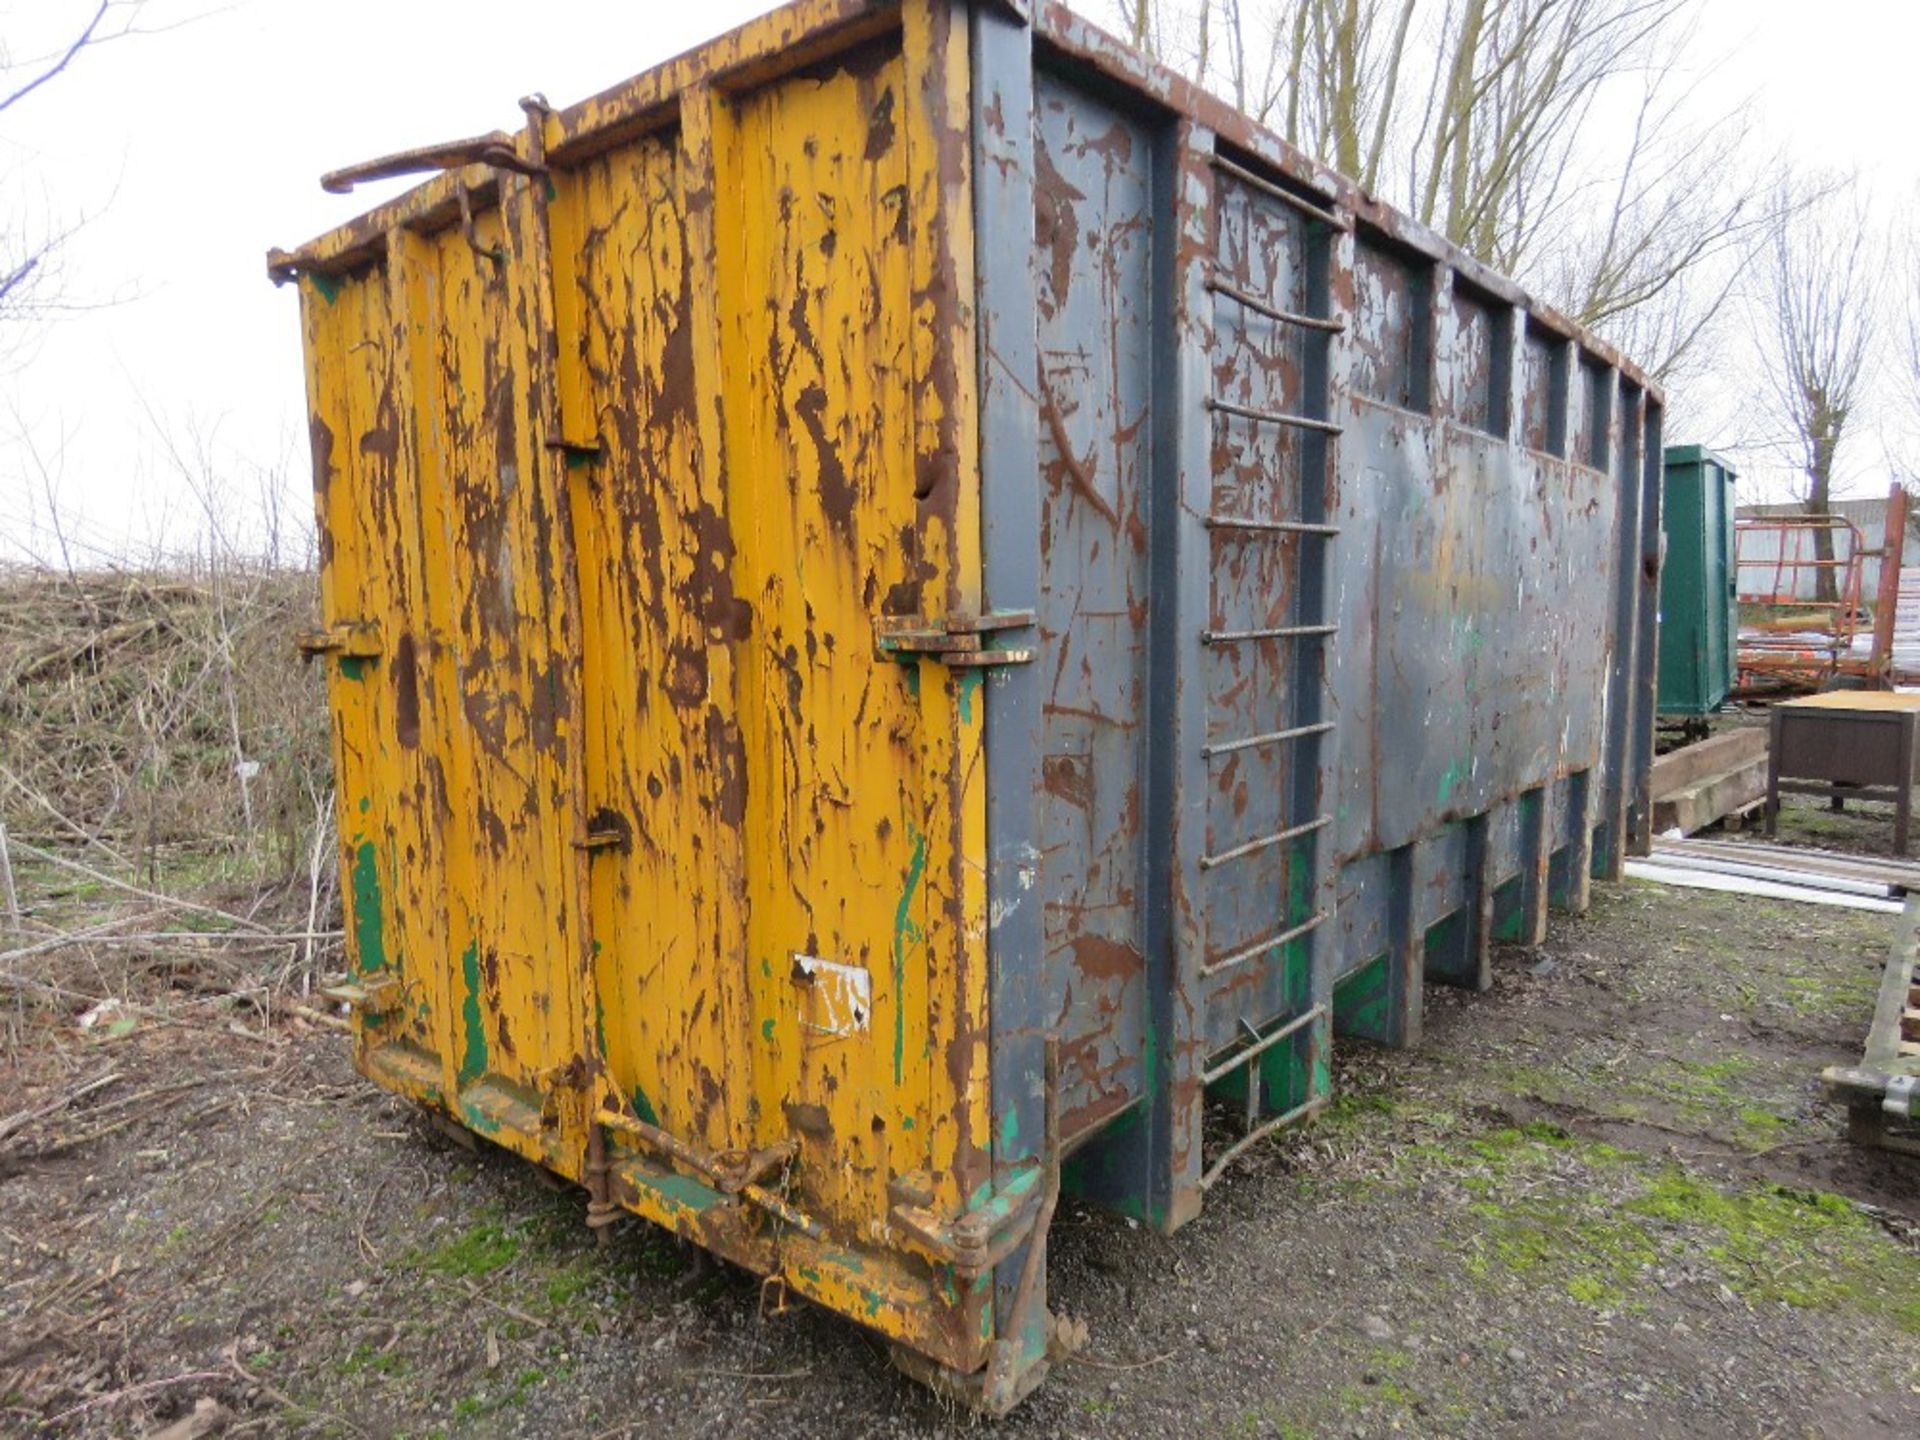 HOOK LOADER 40 YARD ROLLONOFF TYPE WASTE CONTAINER BIN, SOURCED FROM DEPOT CLOSURE. - Image 4 of 7